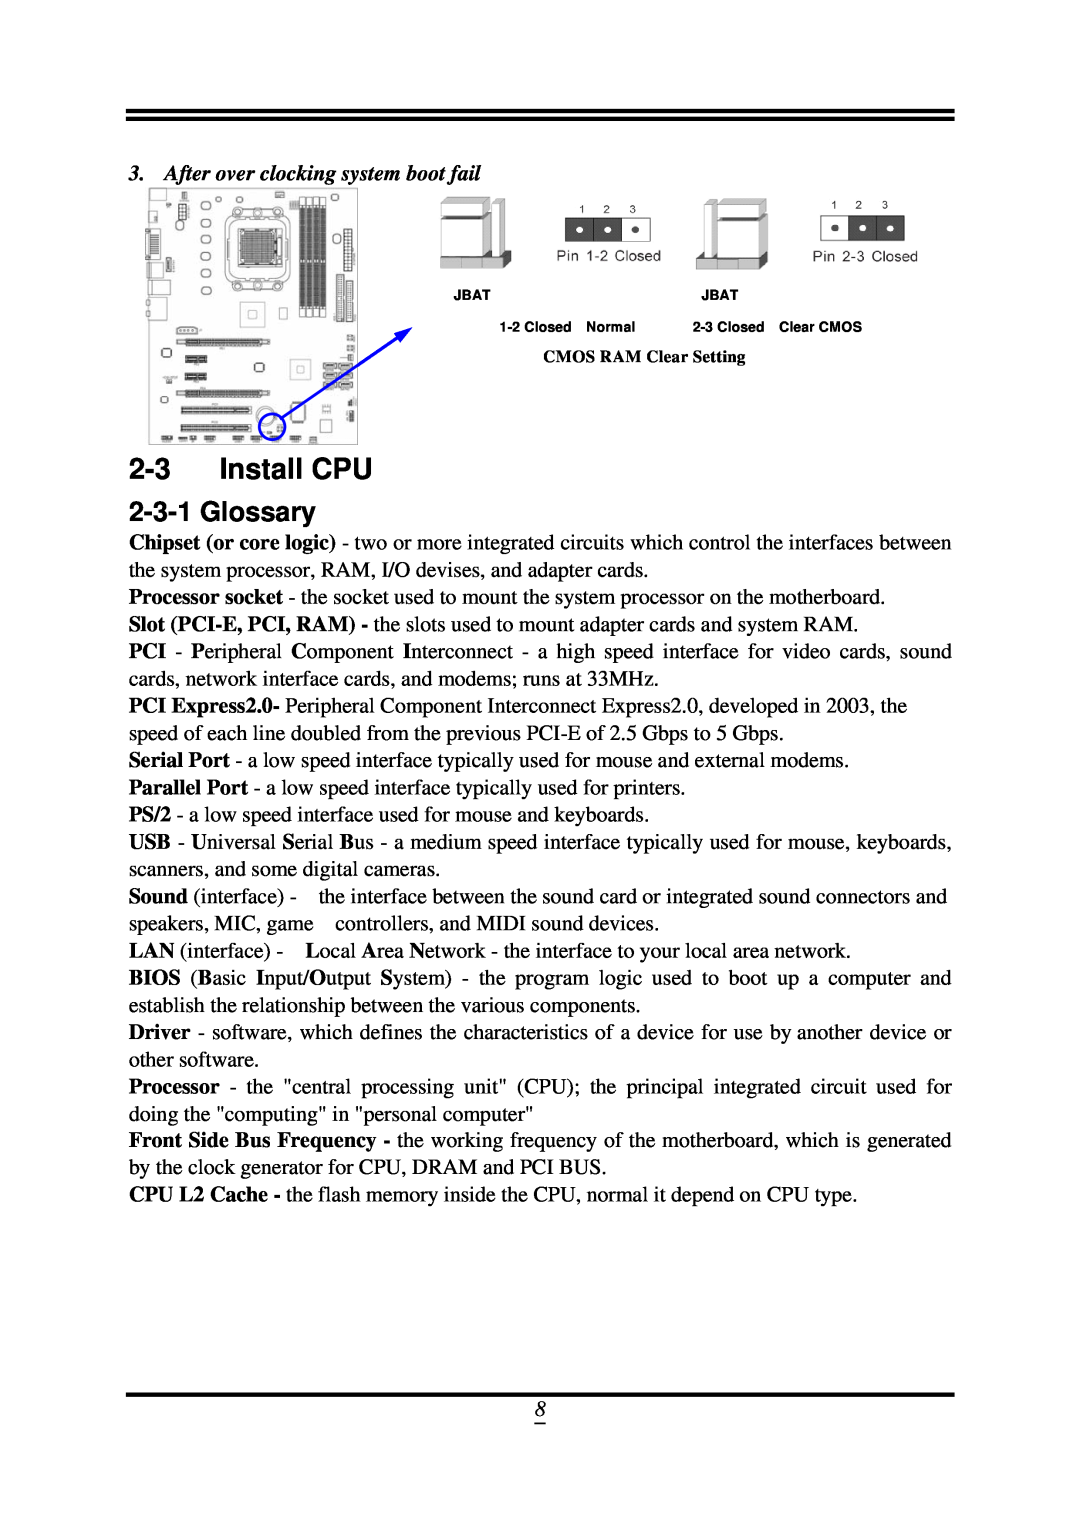 AMD SB750, 790GX user manual Install CPU, Glossary, After over clocking system boot fail 